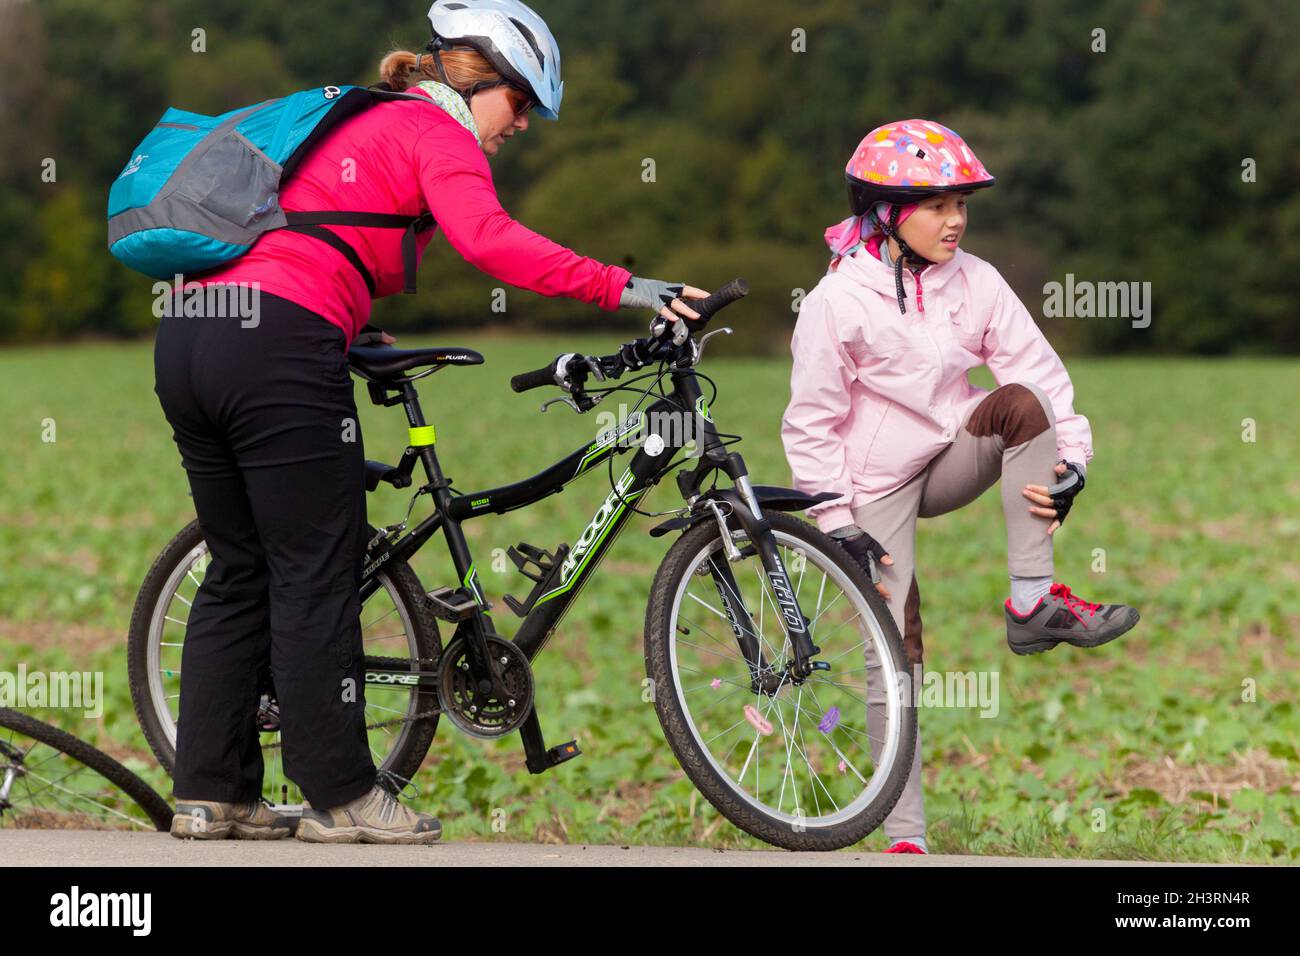 Child after falling off the bike, a girl with a bike helmet is stroking her bumped knee Stock Photo